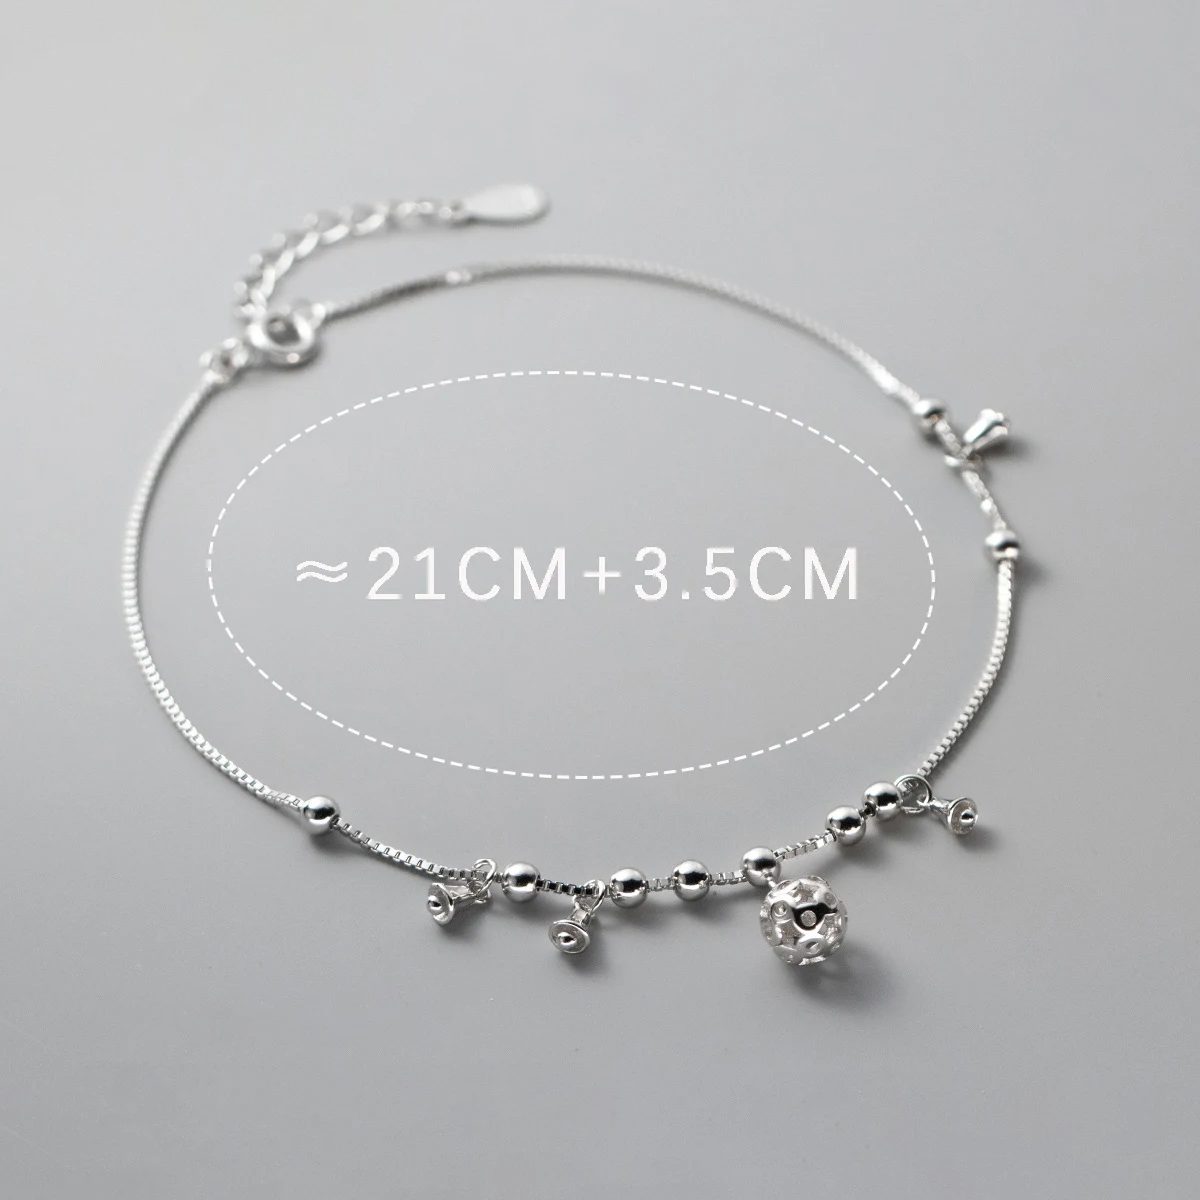 MIQIAO Silver 925 Anklets For Women Small Ball Bell Foot Bracelet On The Leg Jewelry Real Certified Ankle Chains 925 Sterling